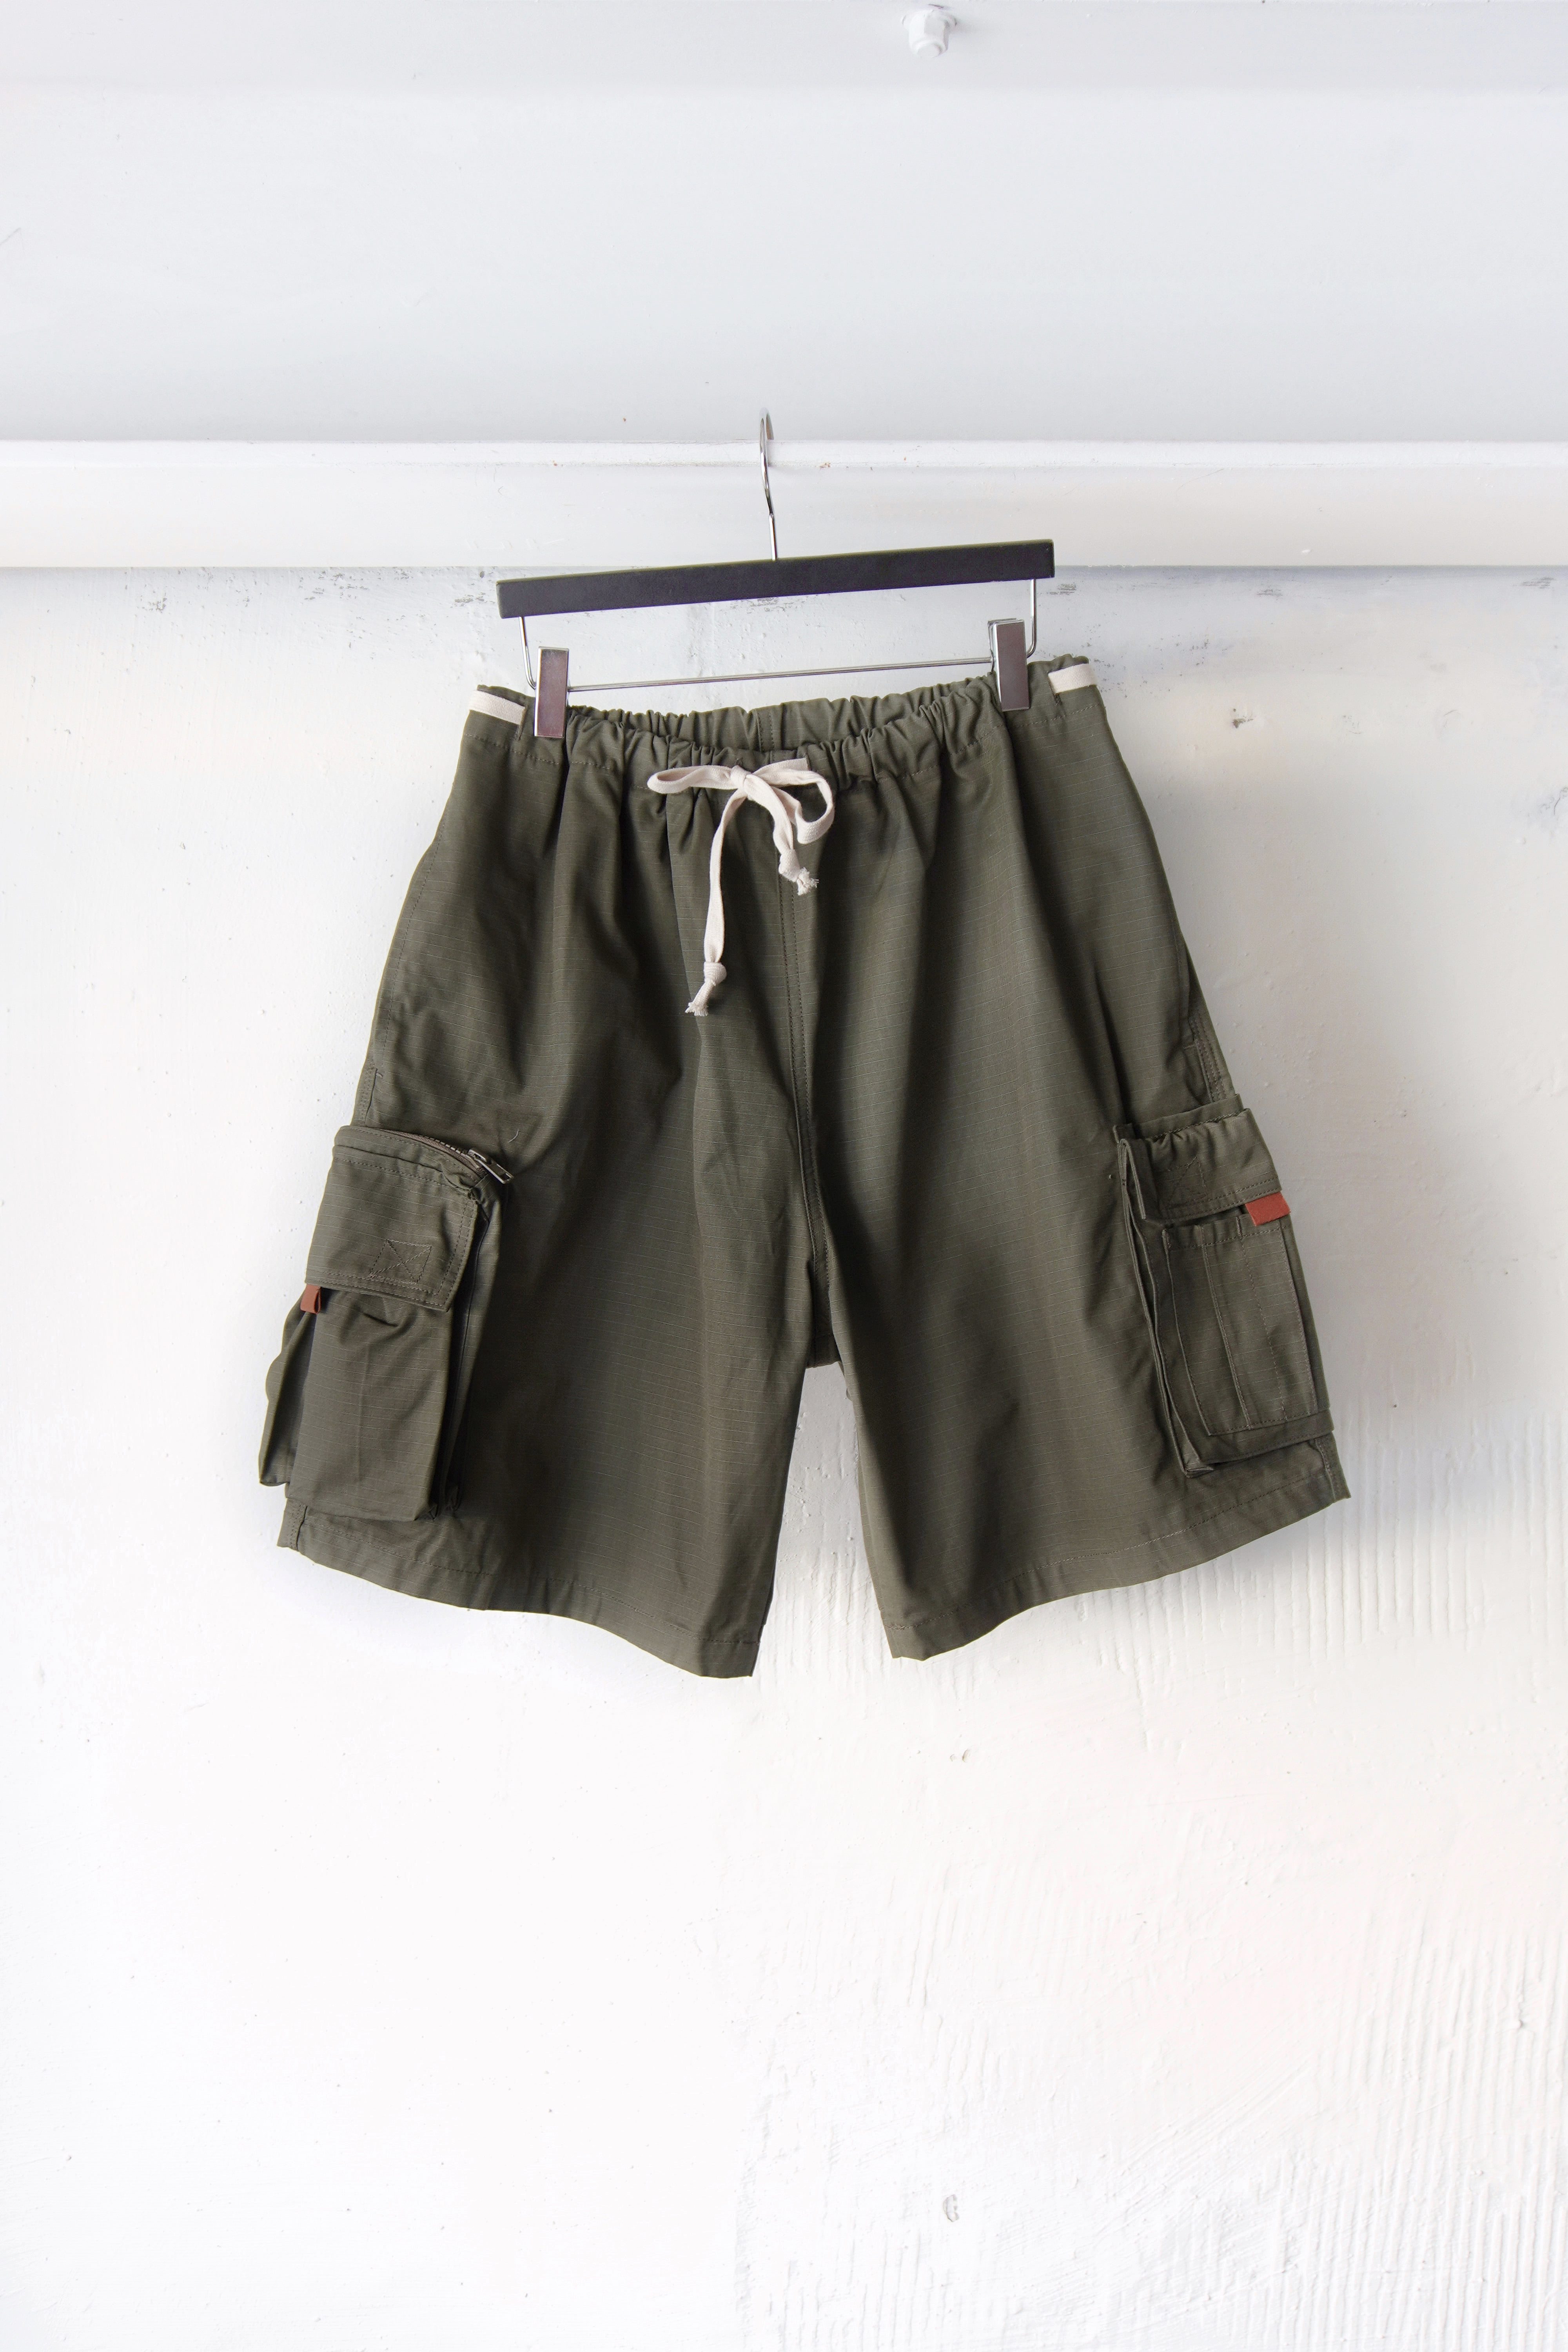 [KENNETH FIELD]  Guide Shorts ⅡRipstop - Olive